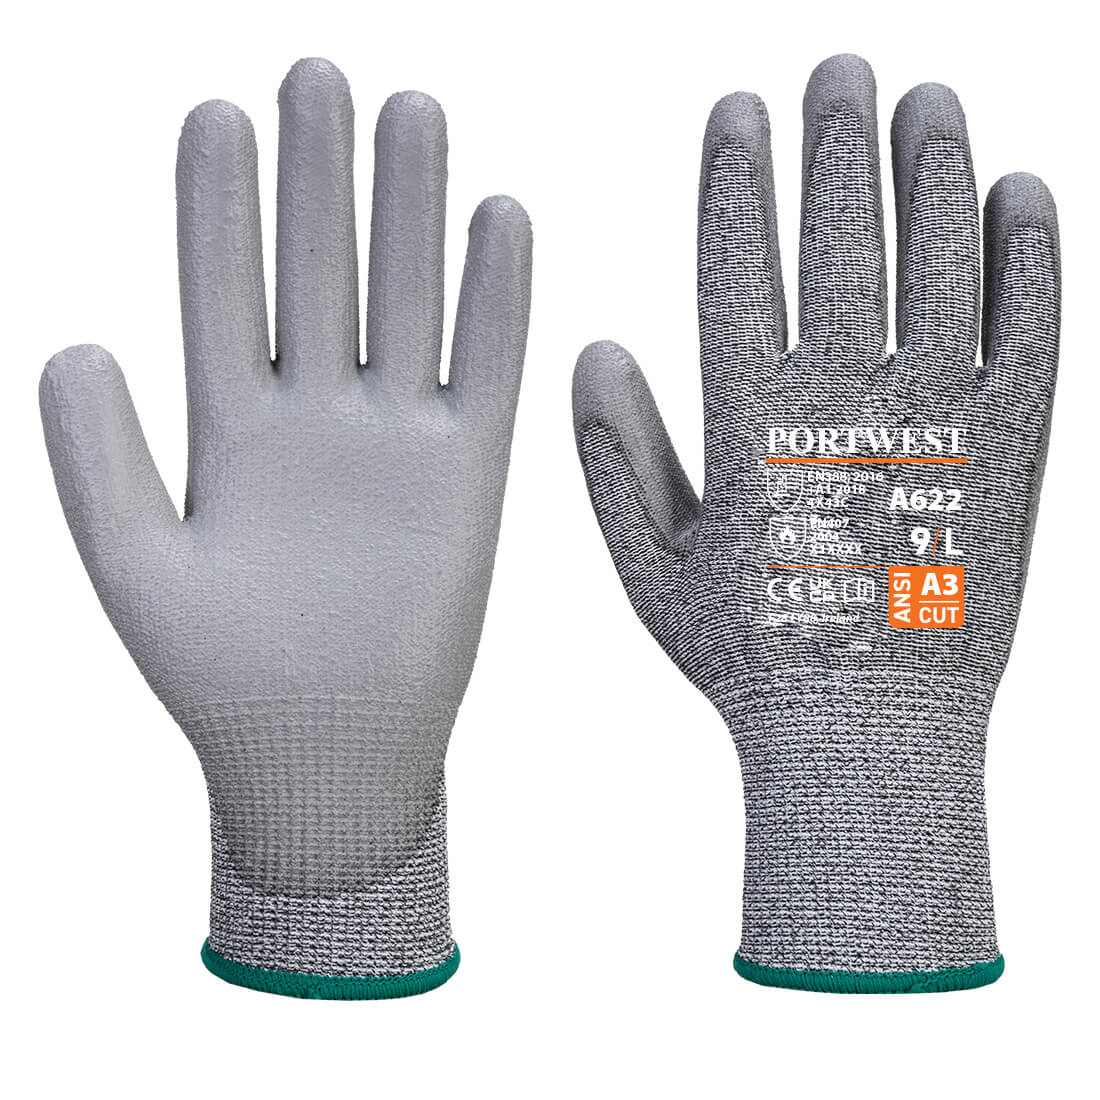 A662 Portwest® MR Cut Gloves withSmooth PU Palm Coating